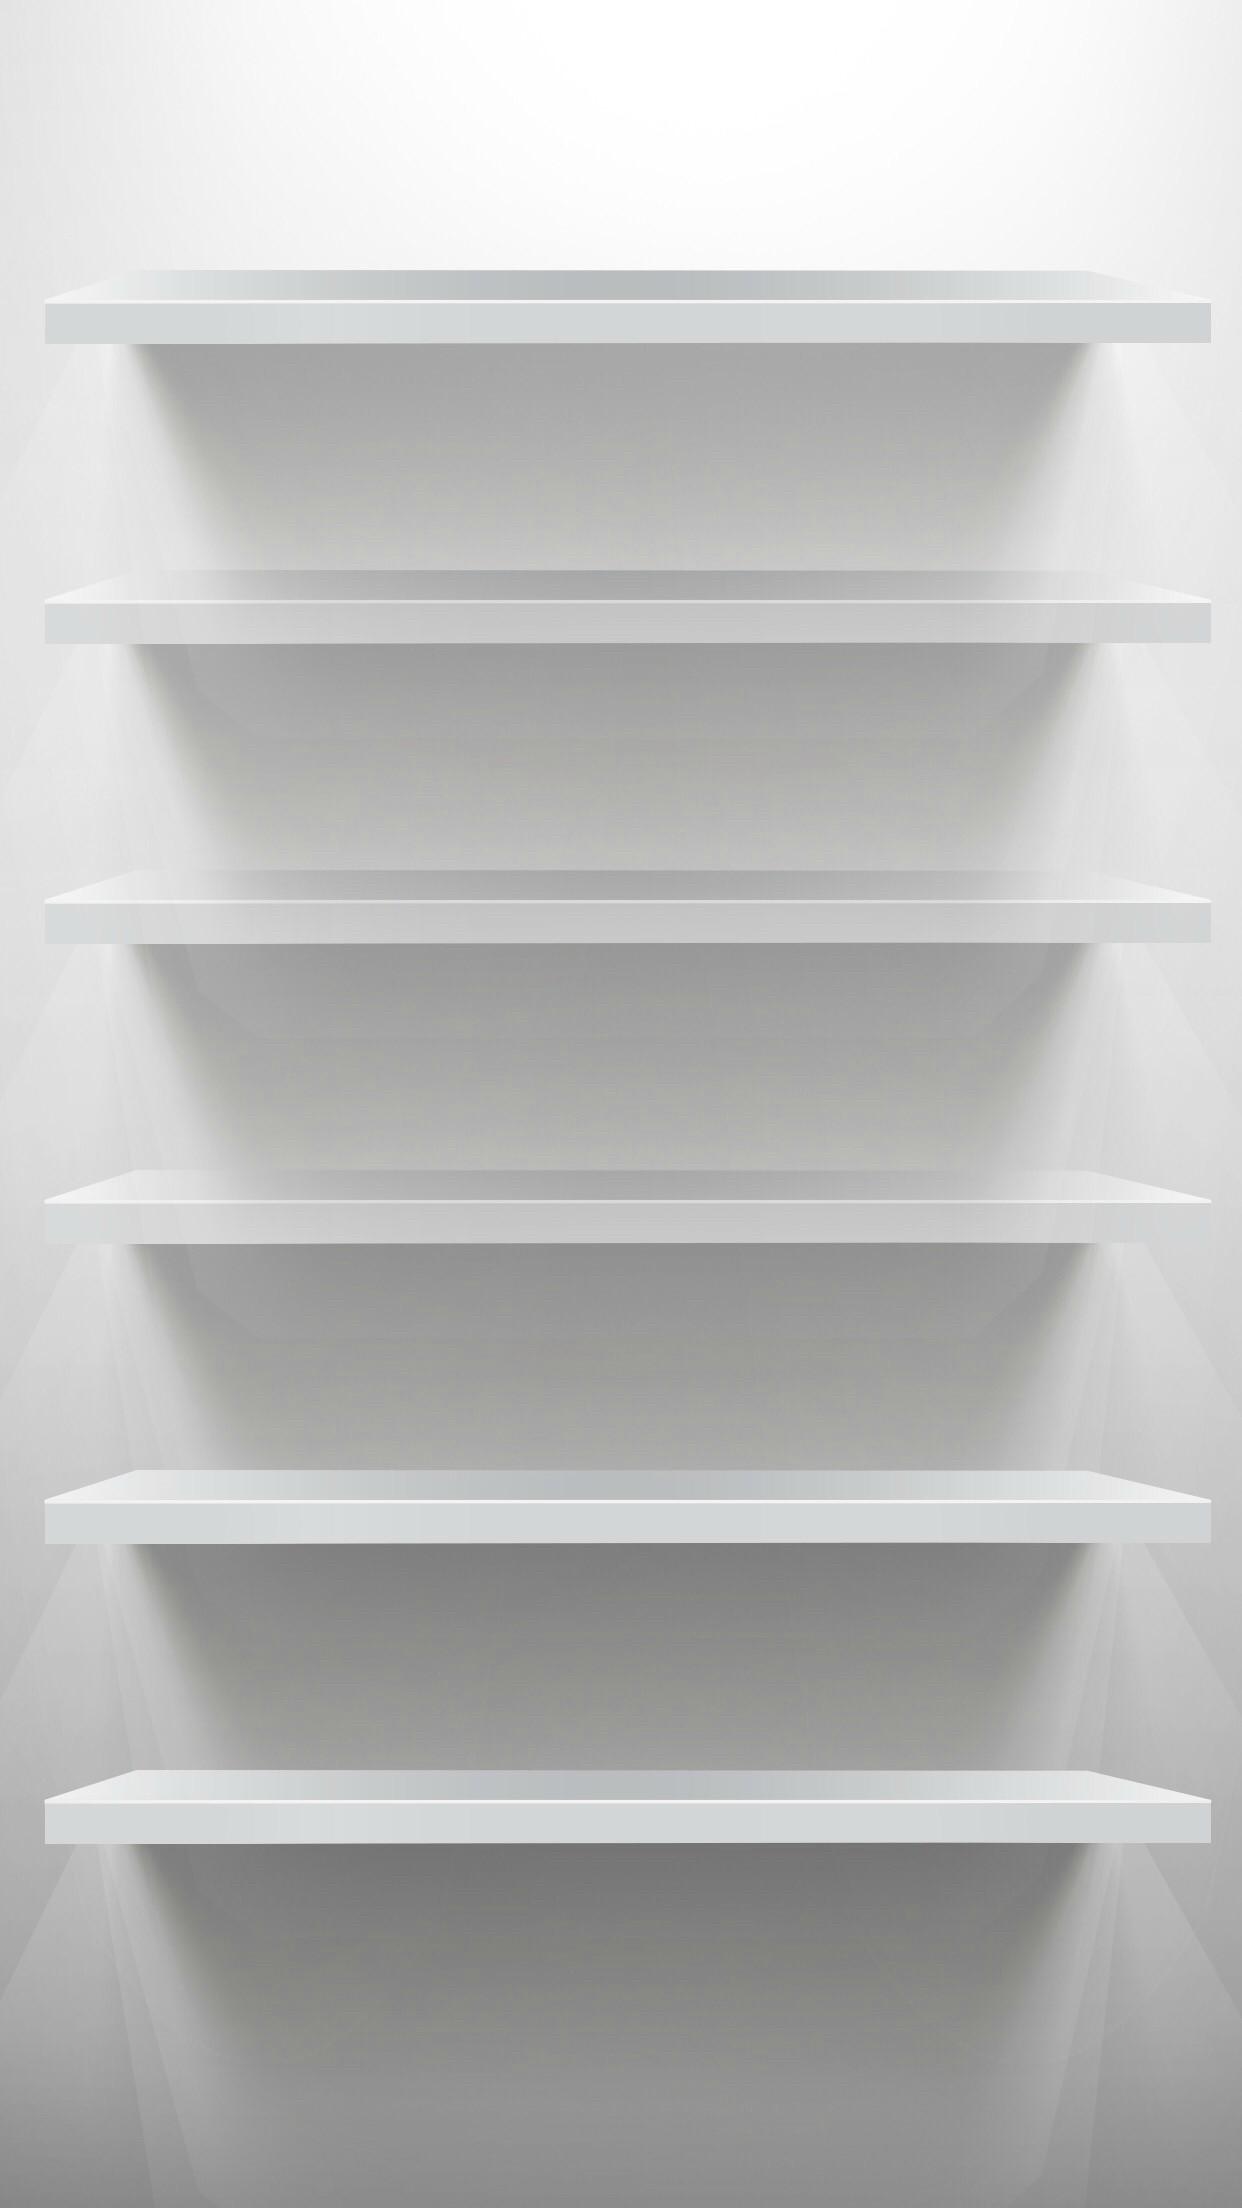 10 Creative Shelves Wallpapers For The IPhone 6 Plus! 1242x2208